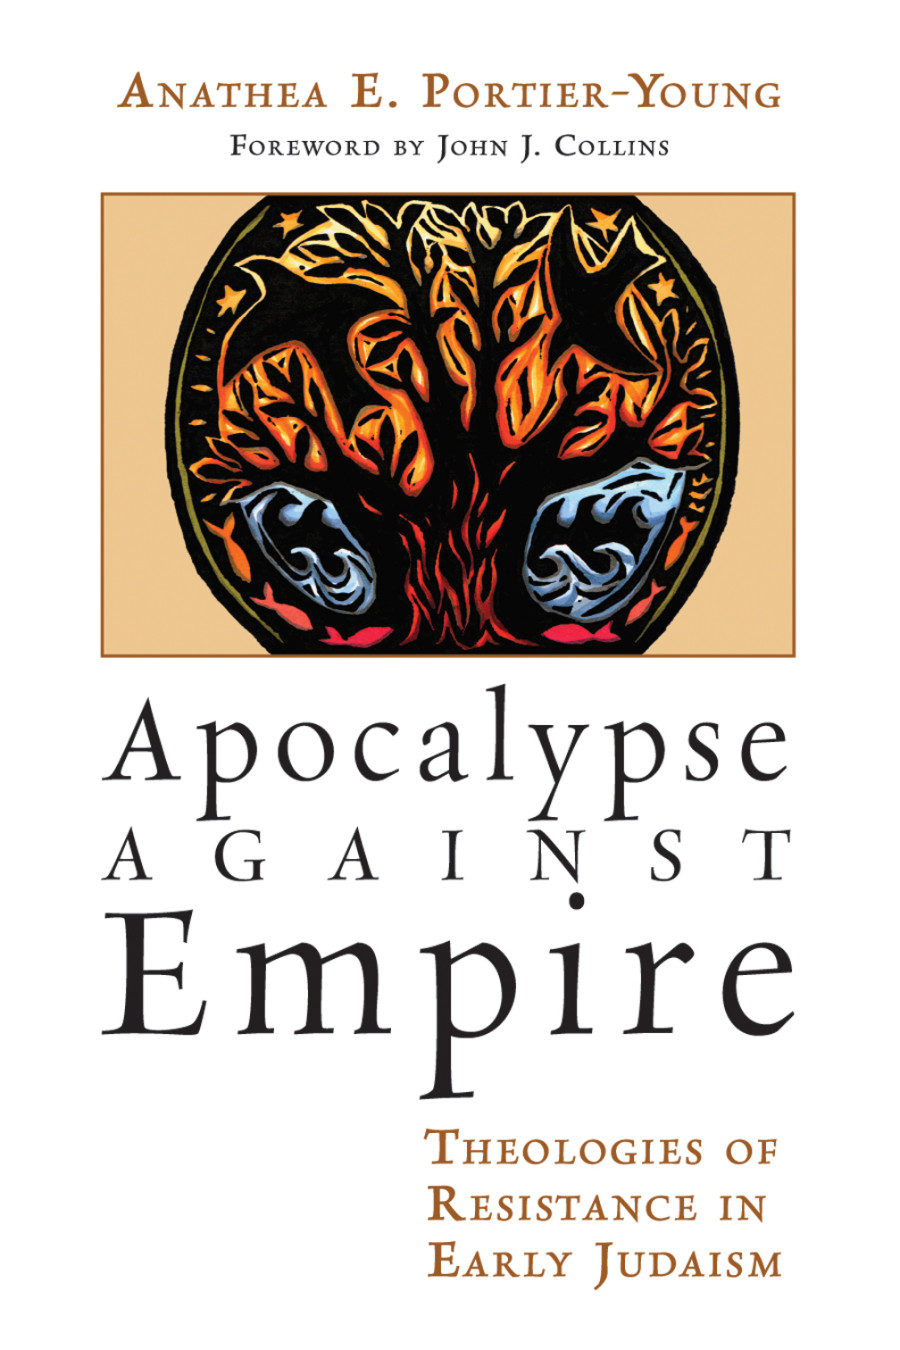 Review of Apocalypse against Empire by Anathea E. Portier-Young